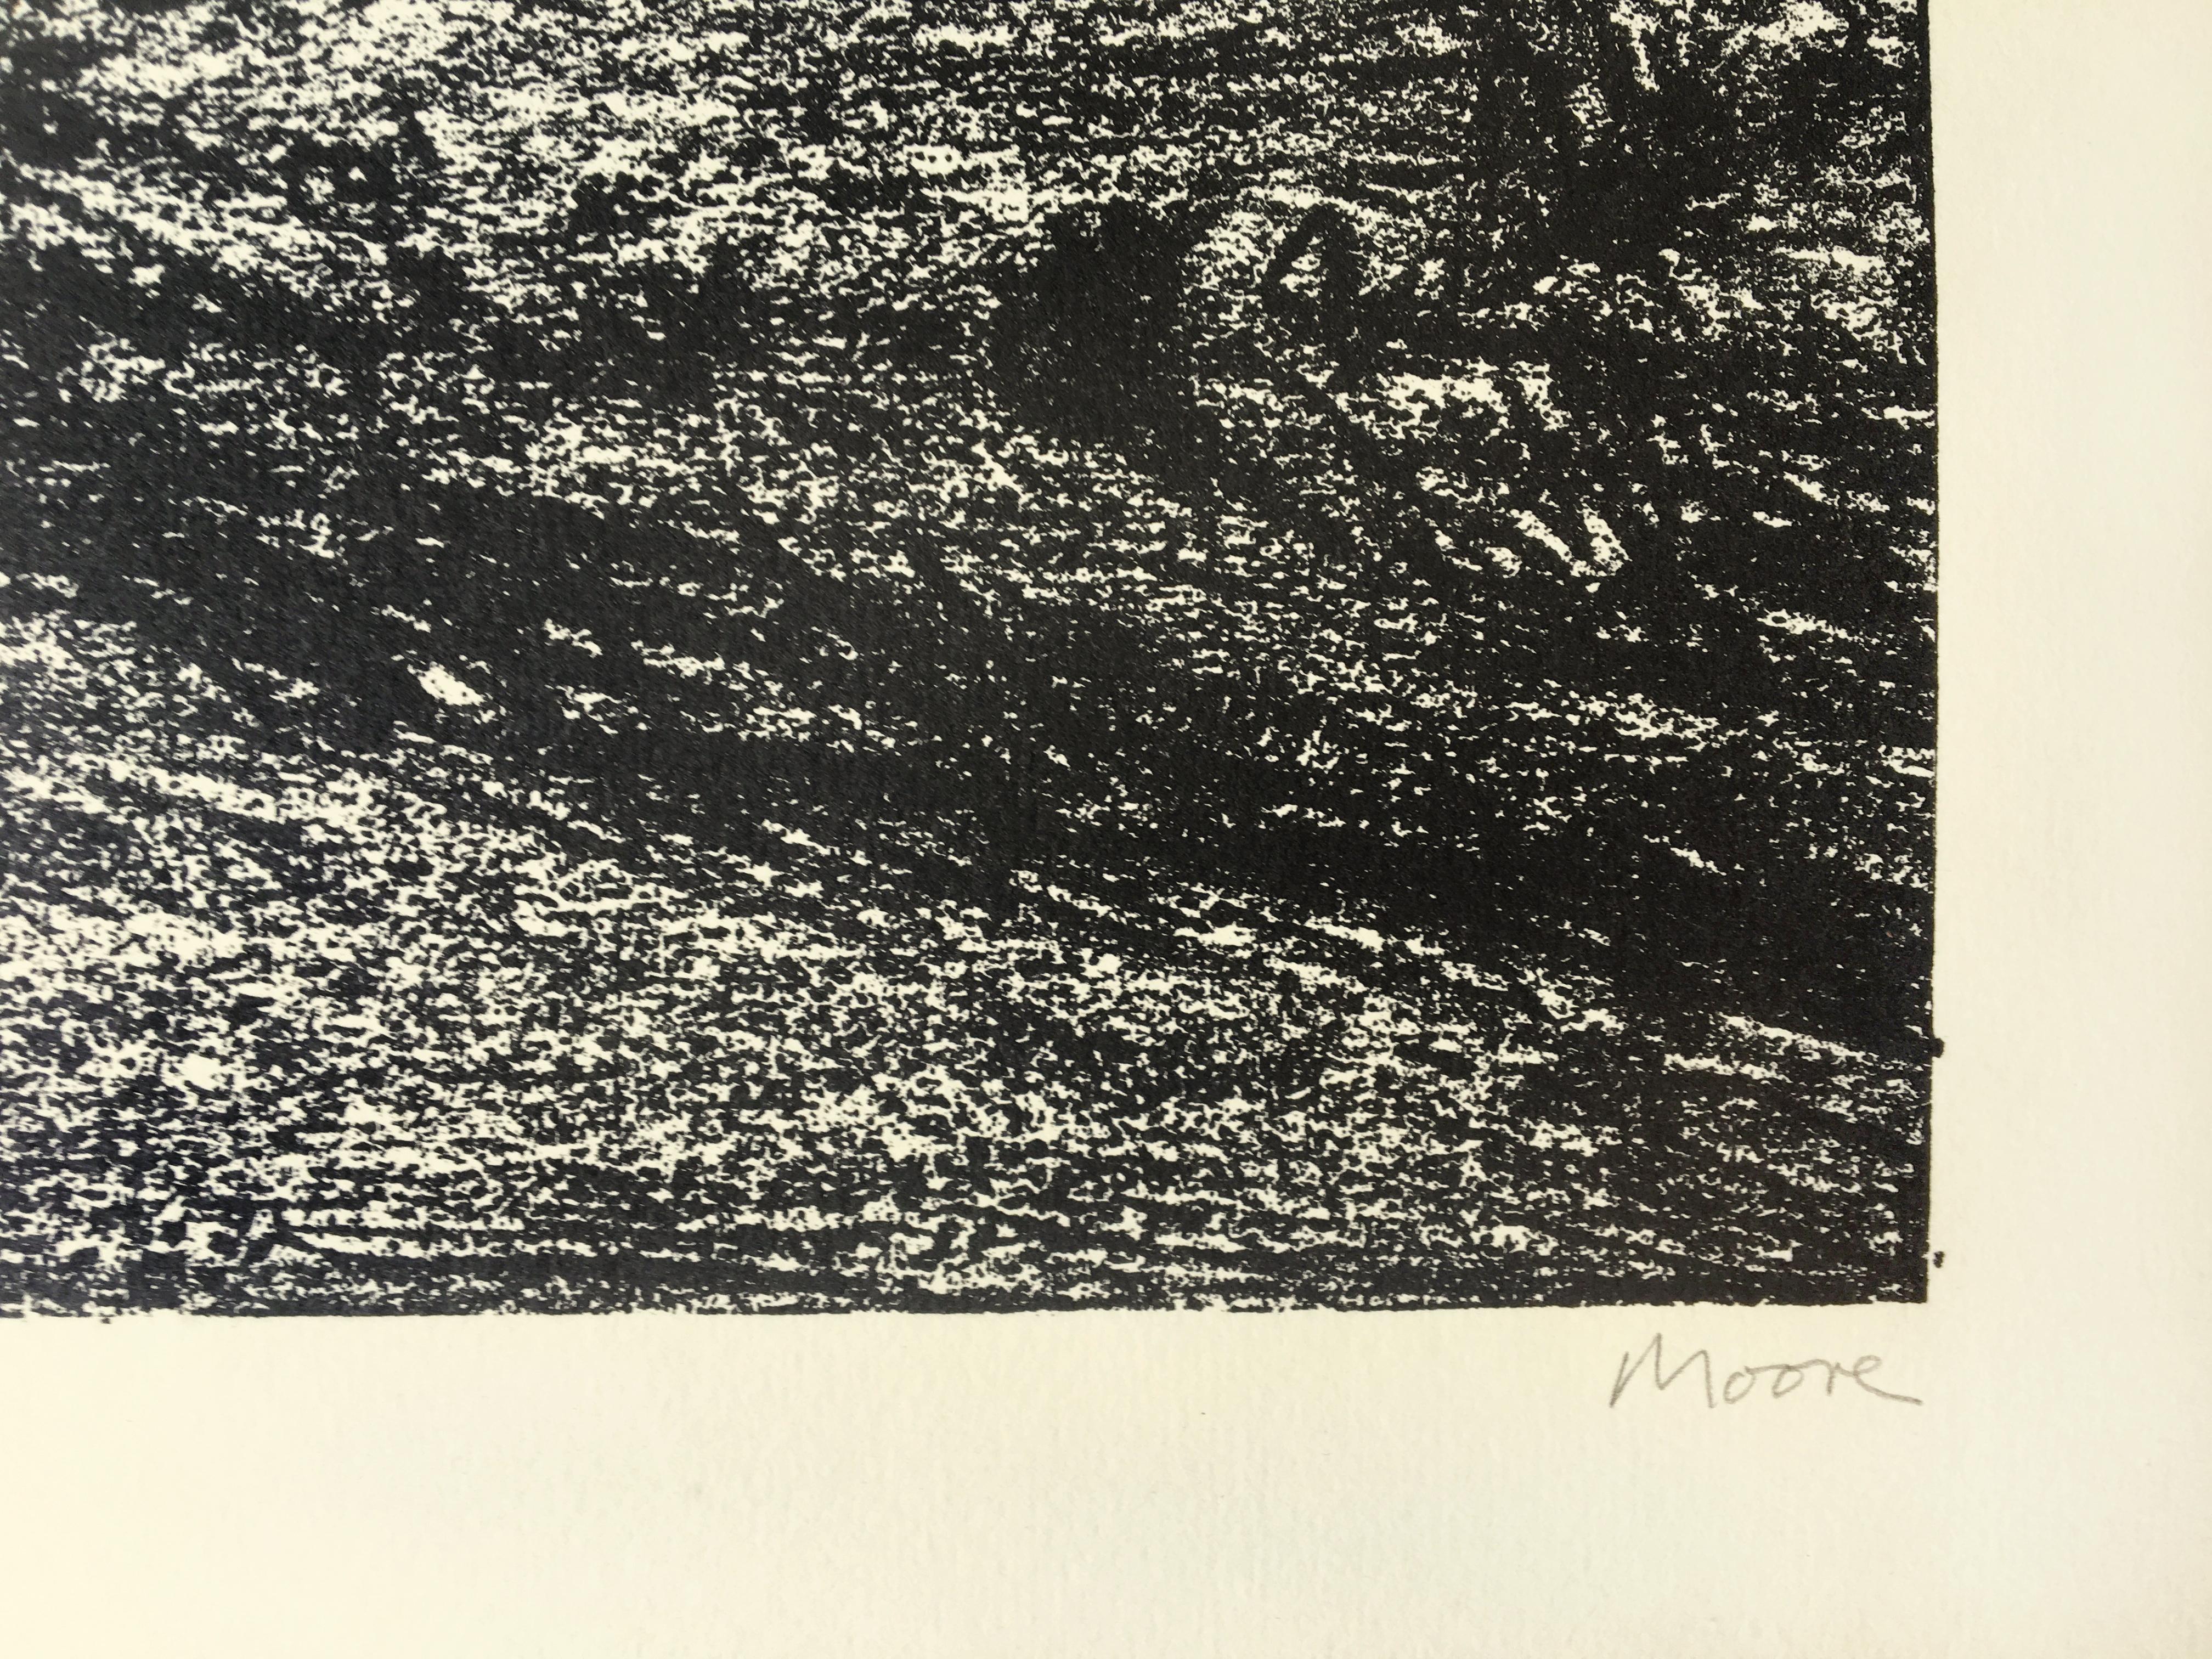 One of a series of 18 lithographs drawn by the artist fo¬r the Auden Poems/Moore Lithographs 1974 book and portfolio. This work is from an edition of 25 printed on vellum aside from the portfolio (edition of 75) and the book. Signed by the artist